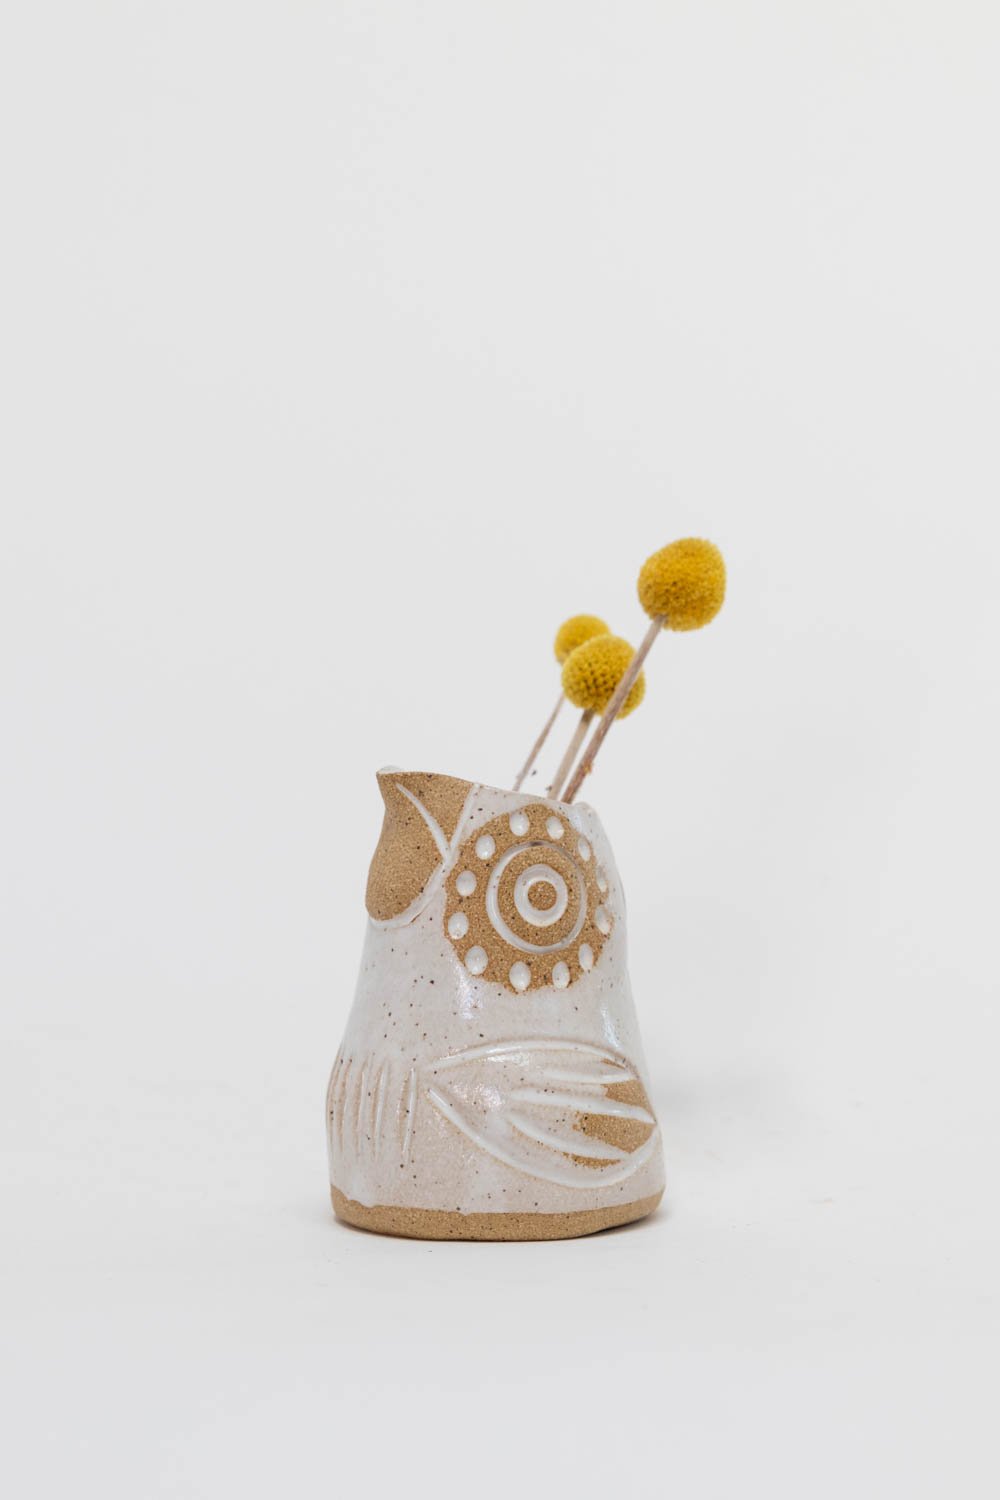 Image of Satin White Dotted Baby Owl Creamer